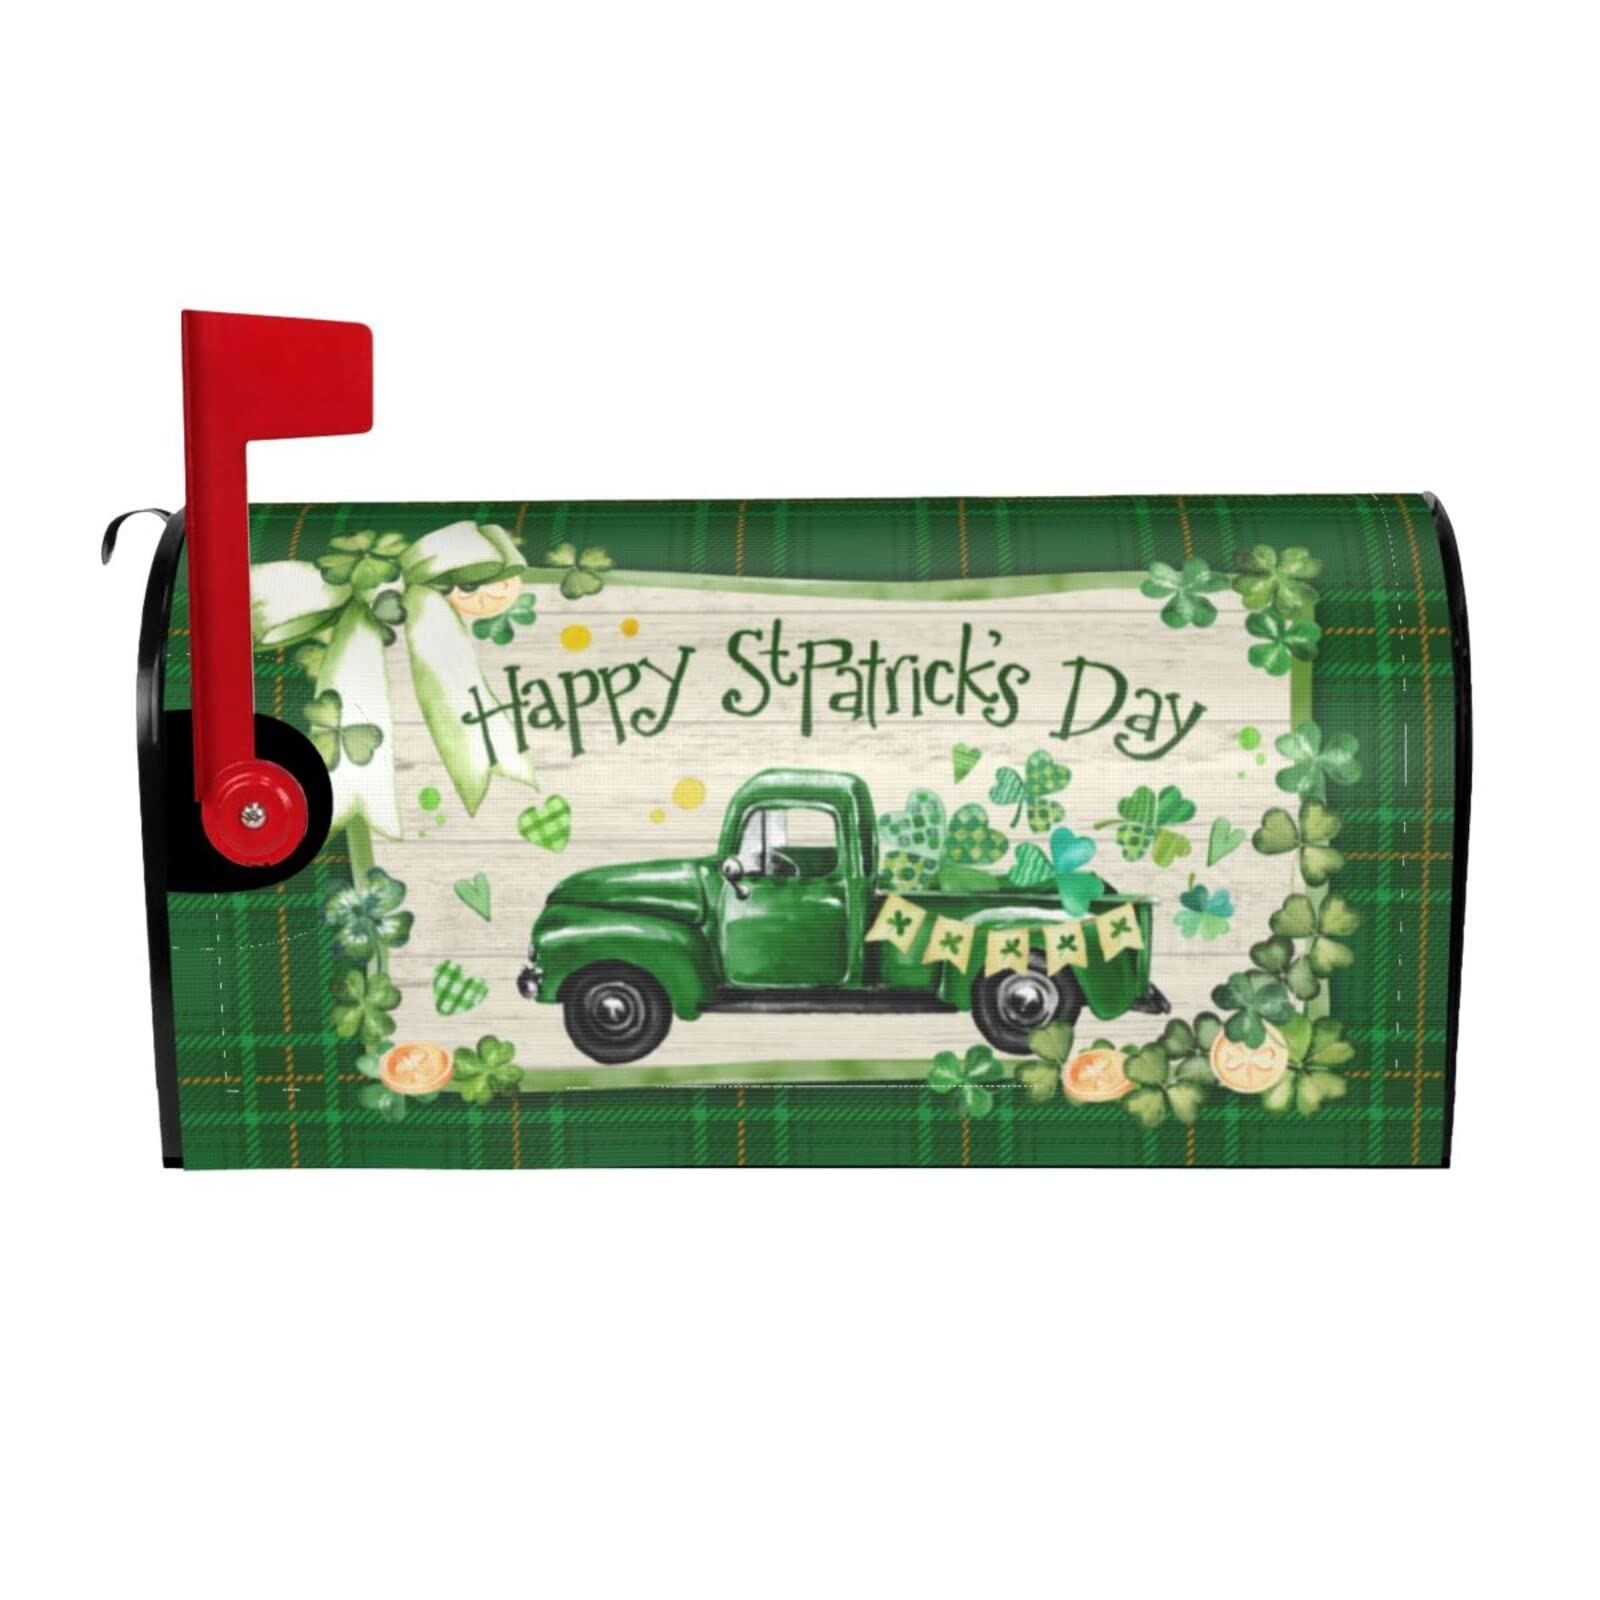 St Patrick's Day Mailbox Covers Green Truck Mailbox Covers Magnetic Standard Size 21x18 Inch Green Clover Letter Box Cover Wrap Decoration for Outside